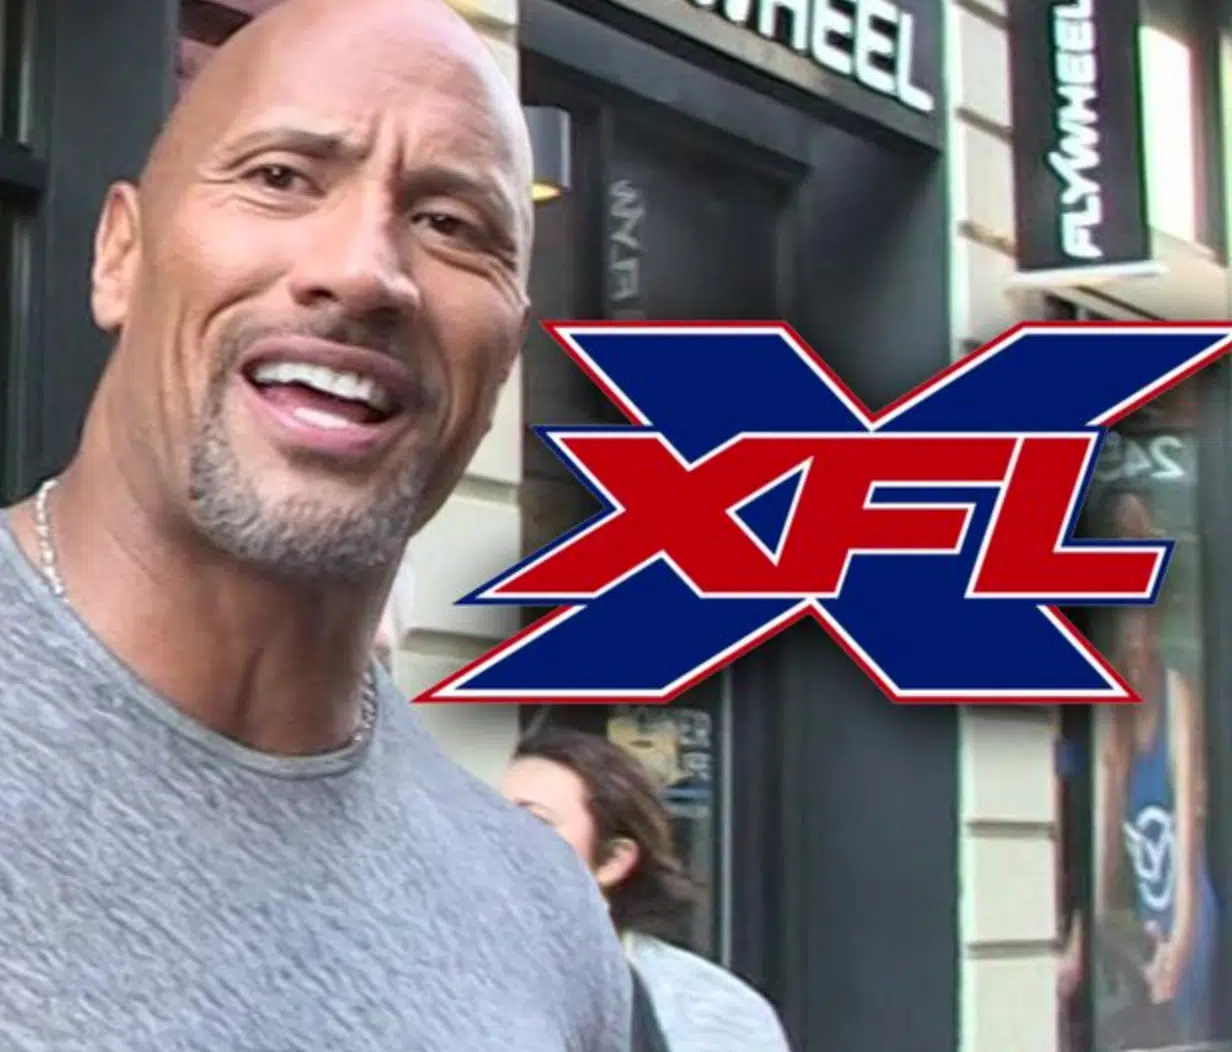 Dwayne 'The Rock' Johnson, Investor Group Agree to Buy XFL for $15M